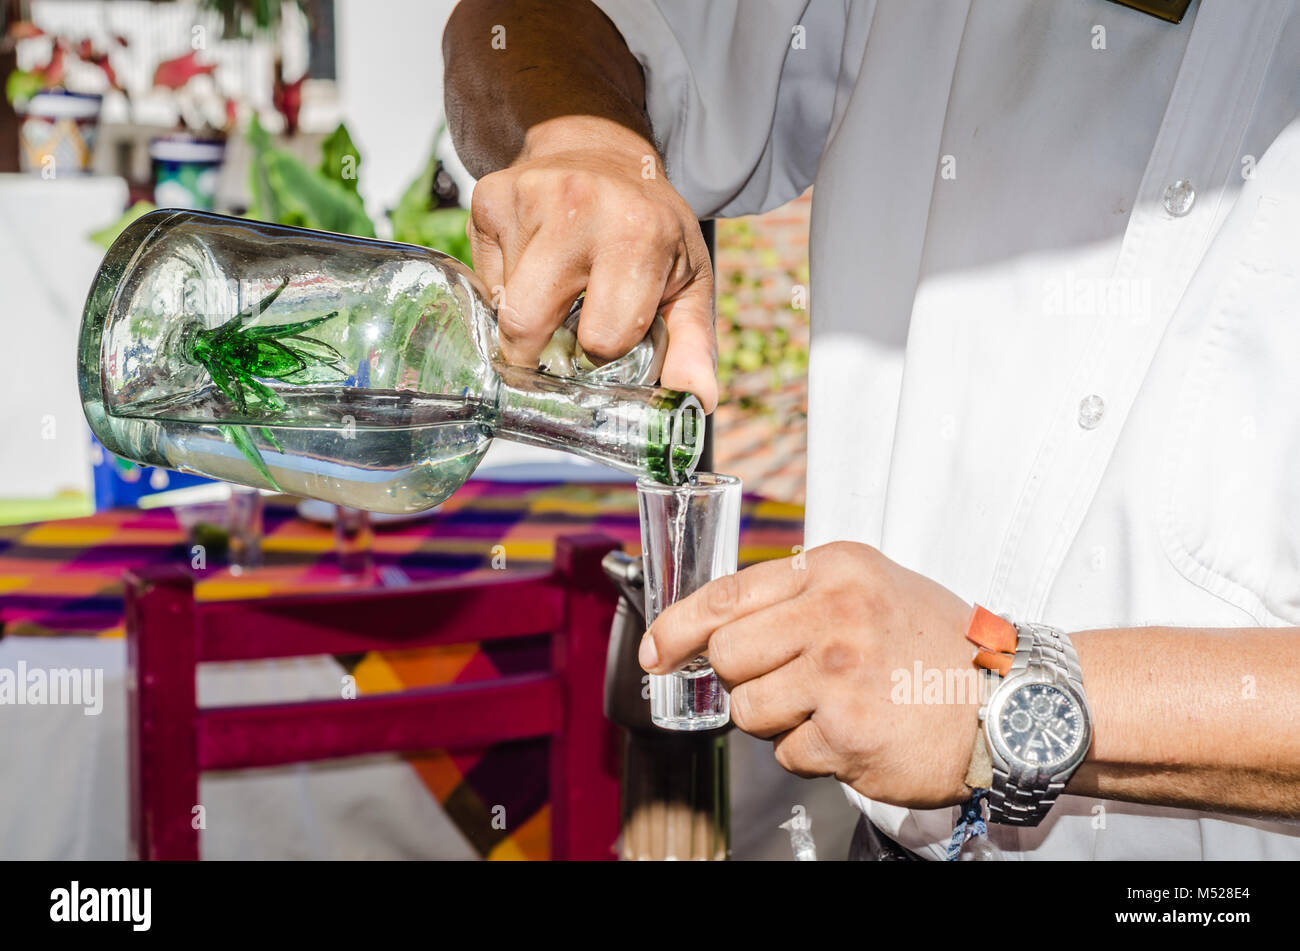 Waiter pours tequila shot from a transparent glass bottle with an agave plant inset in the bottle. Stock Photo